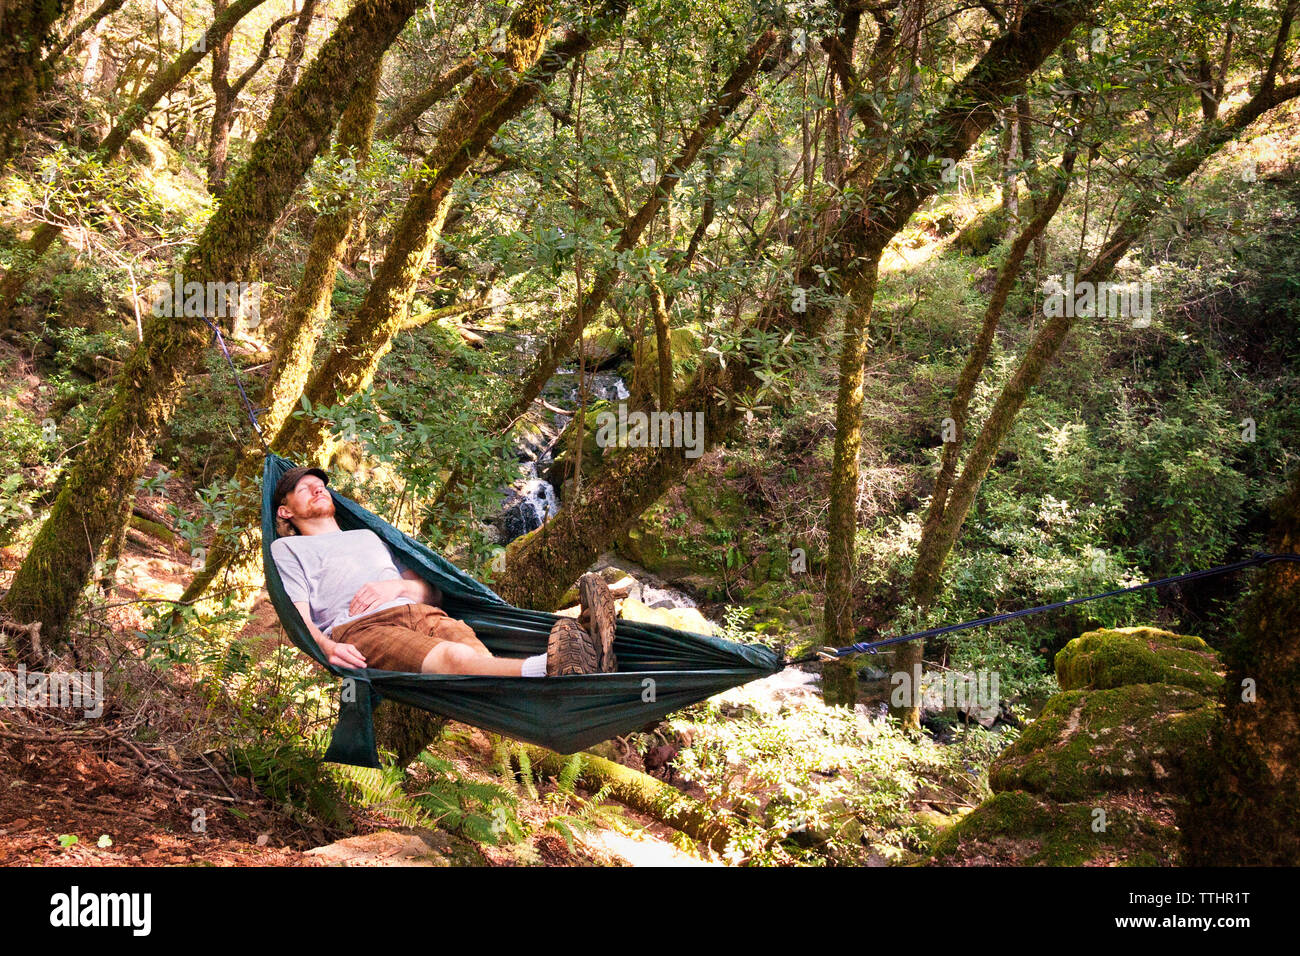 Man relaxing on hammock in forest Stock Photo